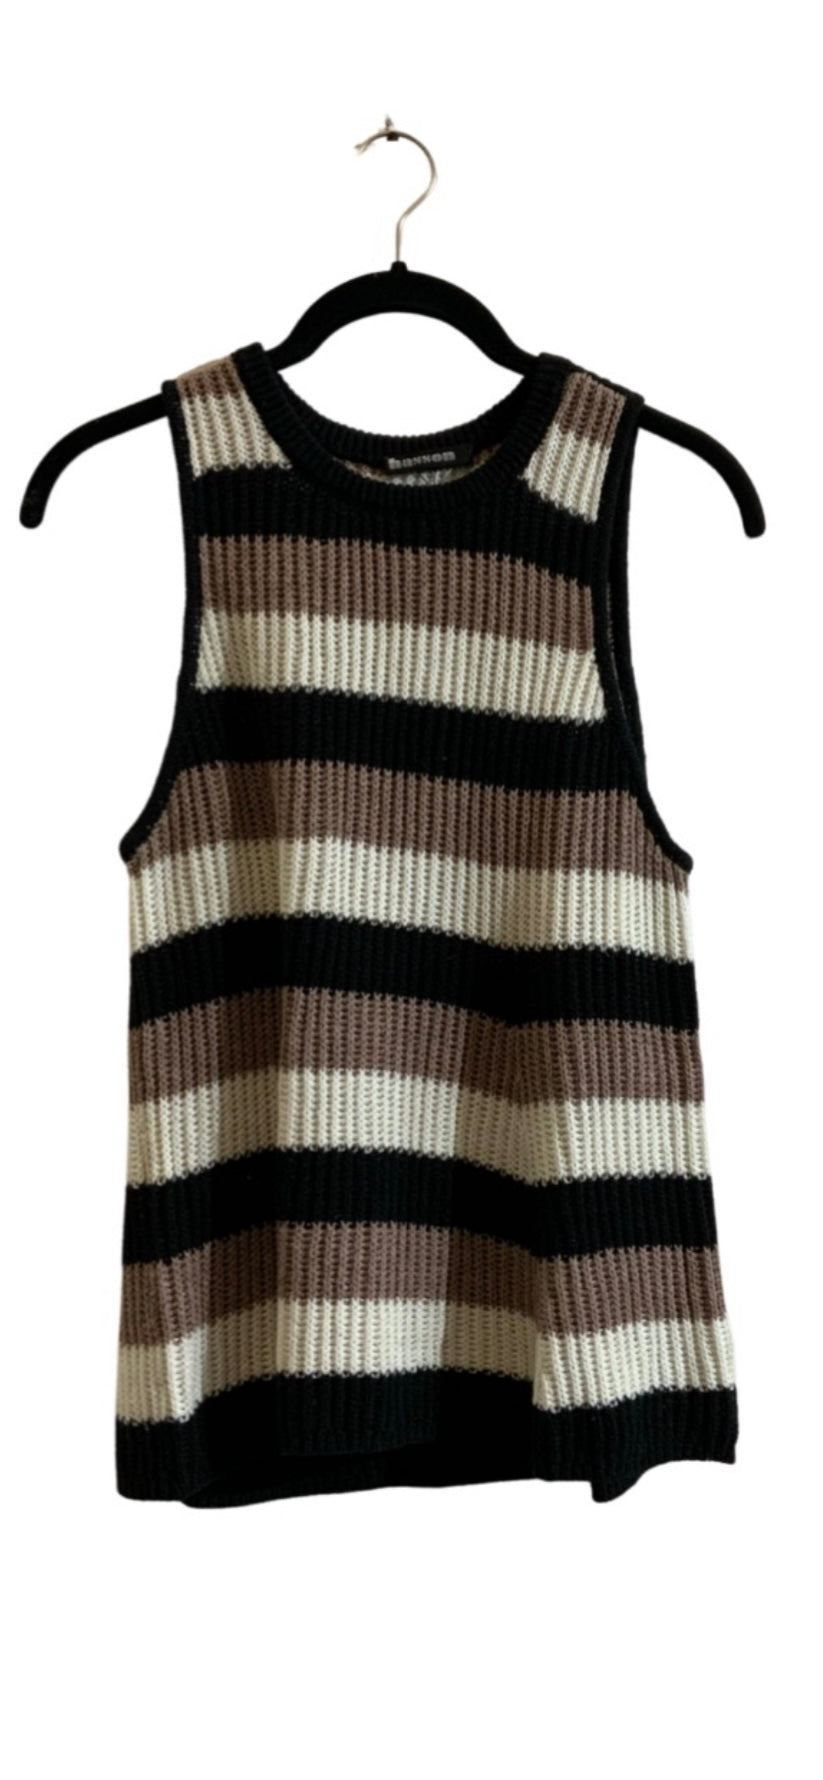 HASSON-Stripped Crew Flare Tank Black/White/Sand